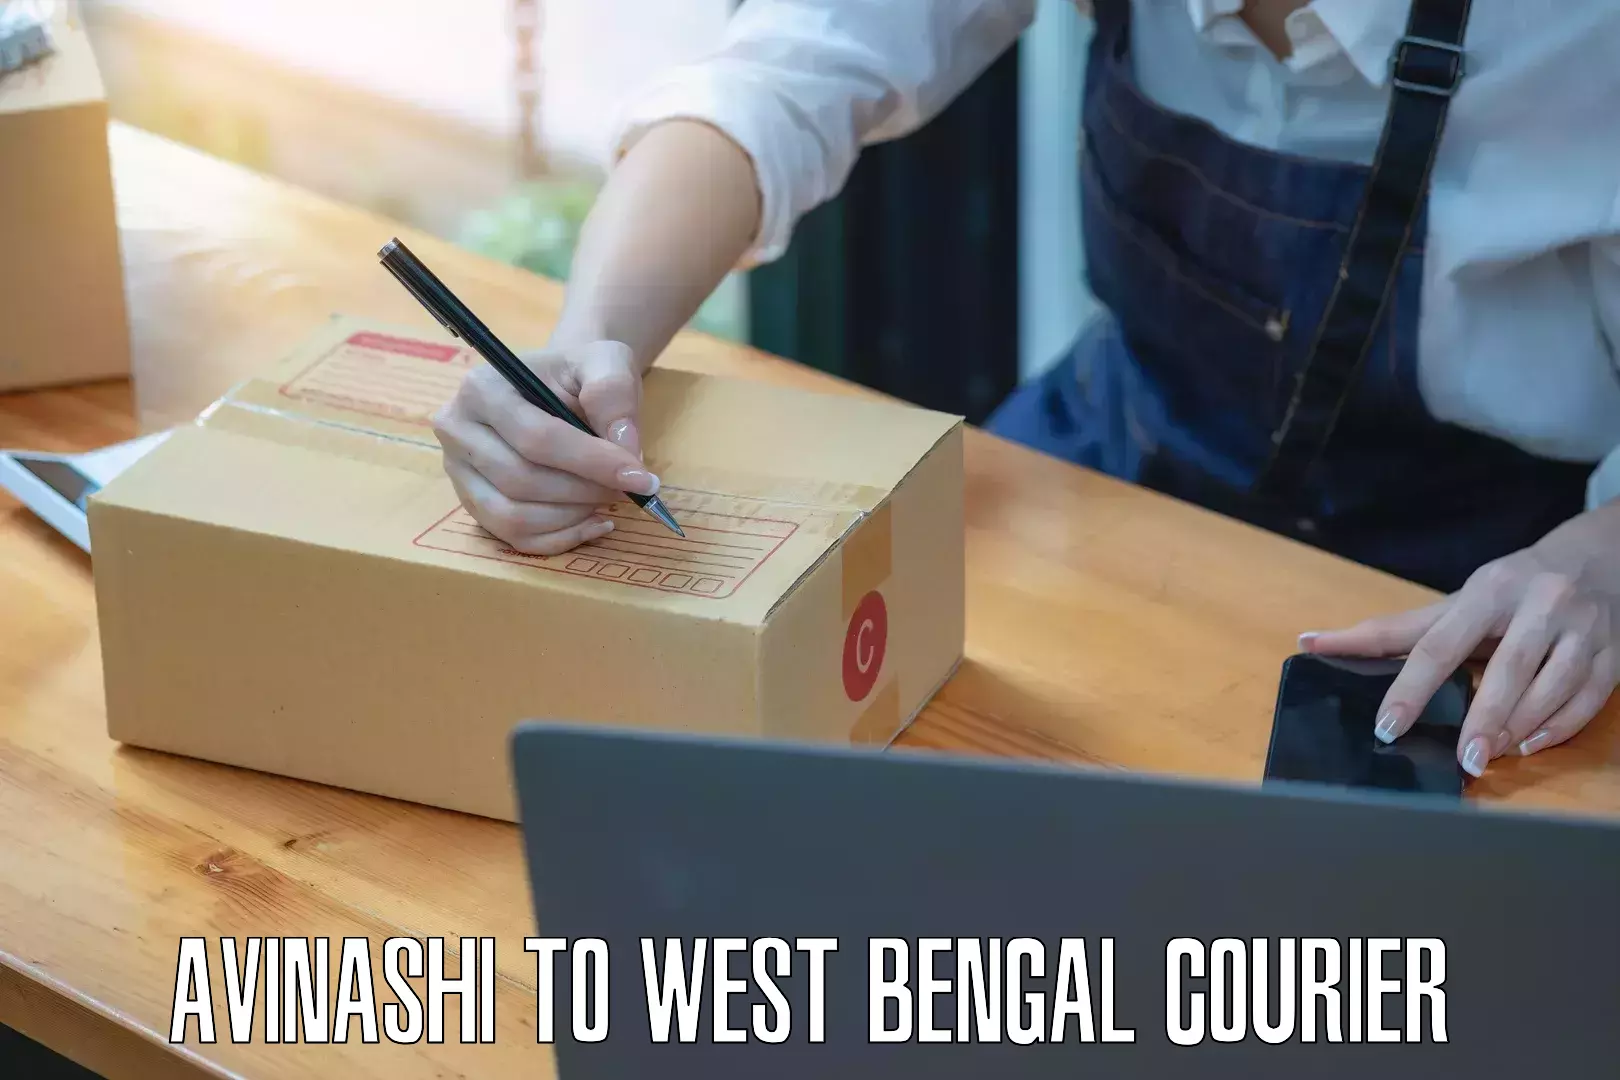 Cash on delivery service Avinashi to West Bengal